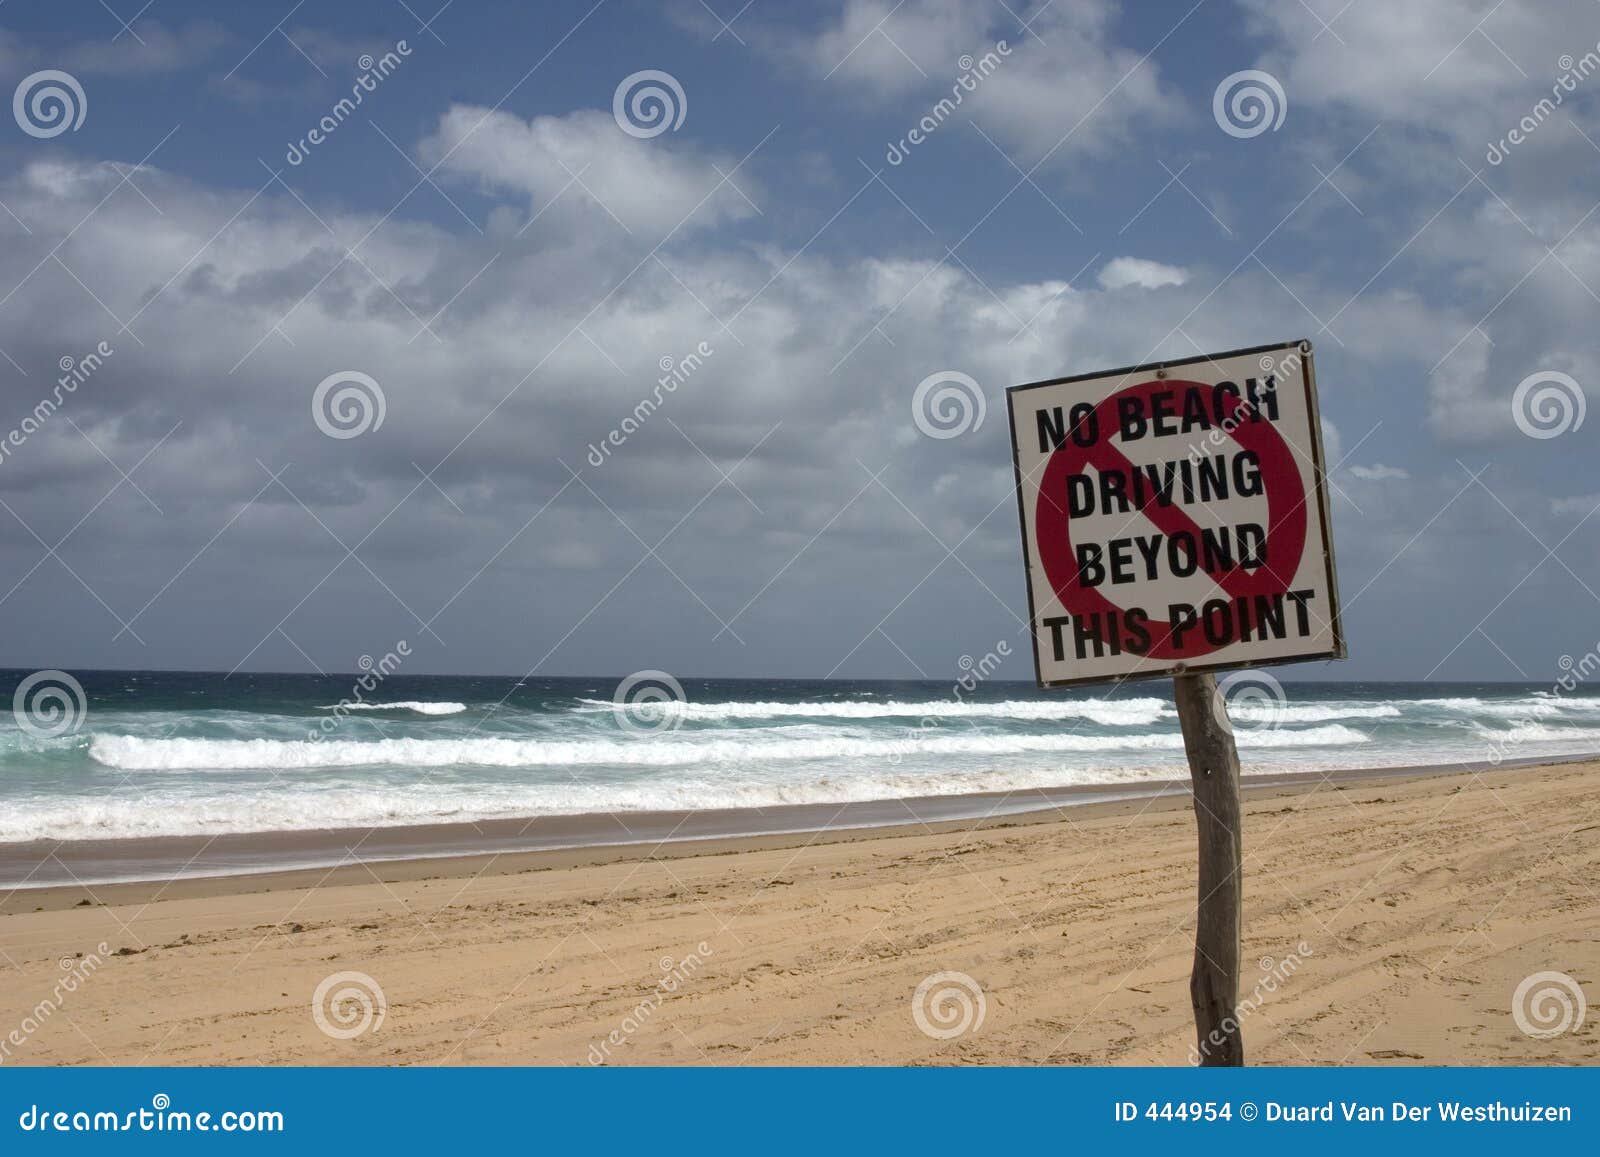 No Beach Driving Stock Images - Image: 444954